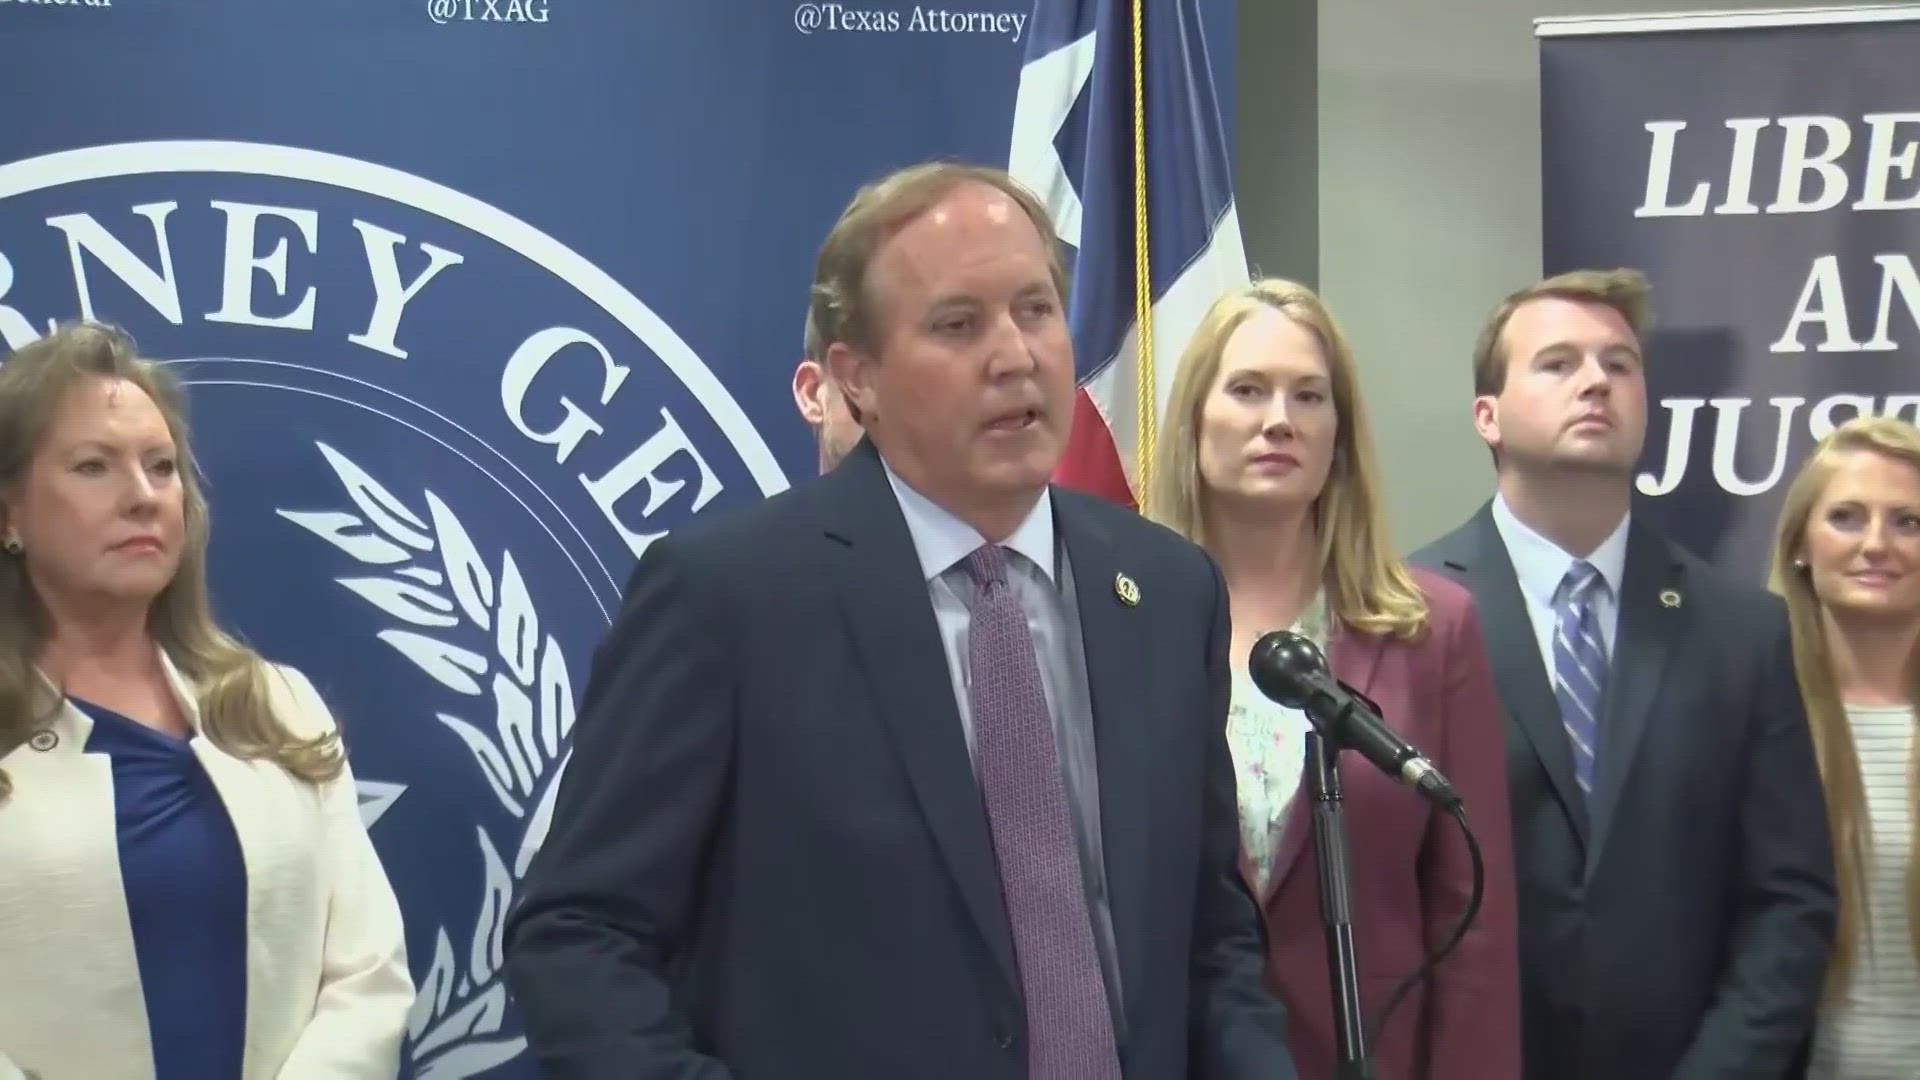 Now Paxton is immediately suspended from his job as a top law enforcement officer in Texas, pending the outcome of a trial in the Texas Senate.